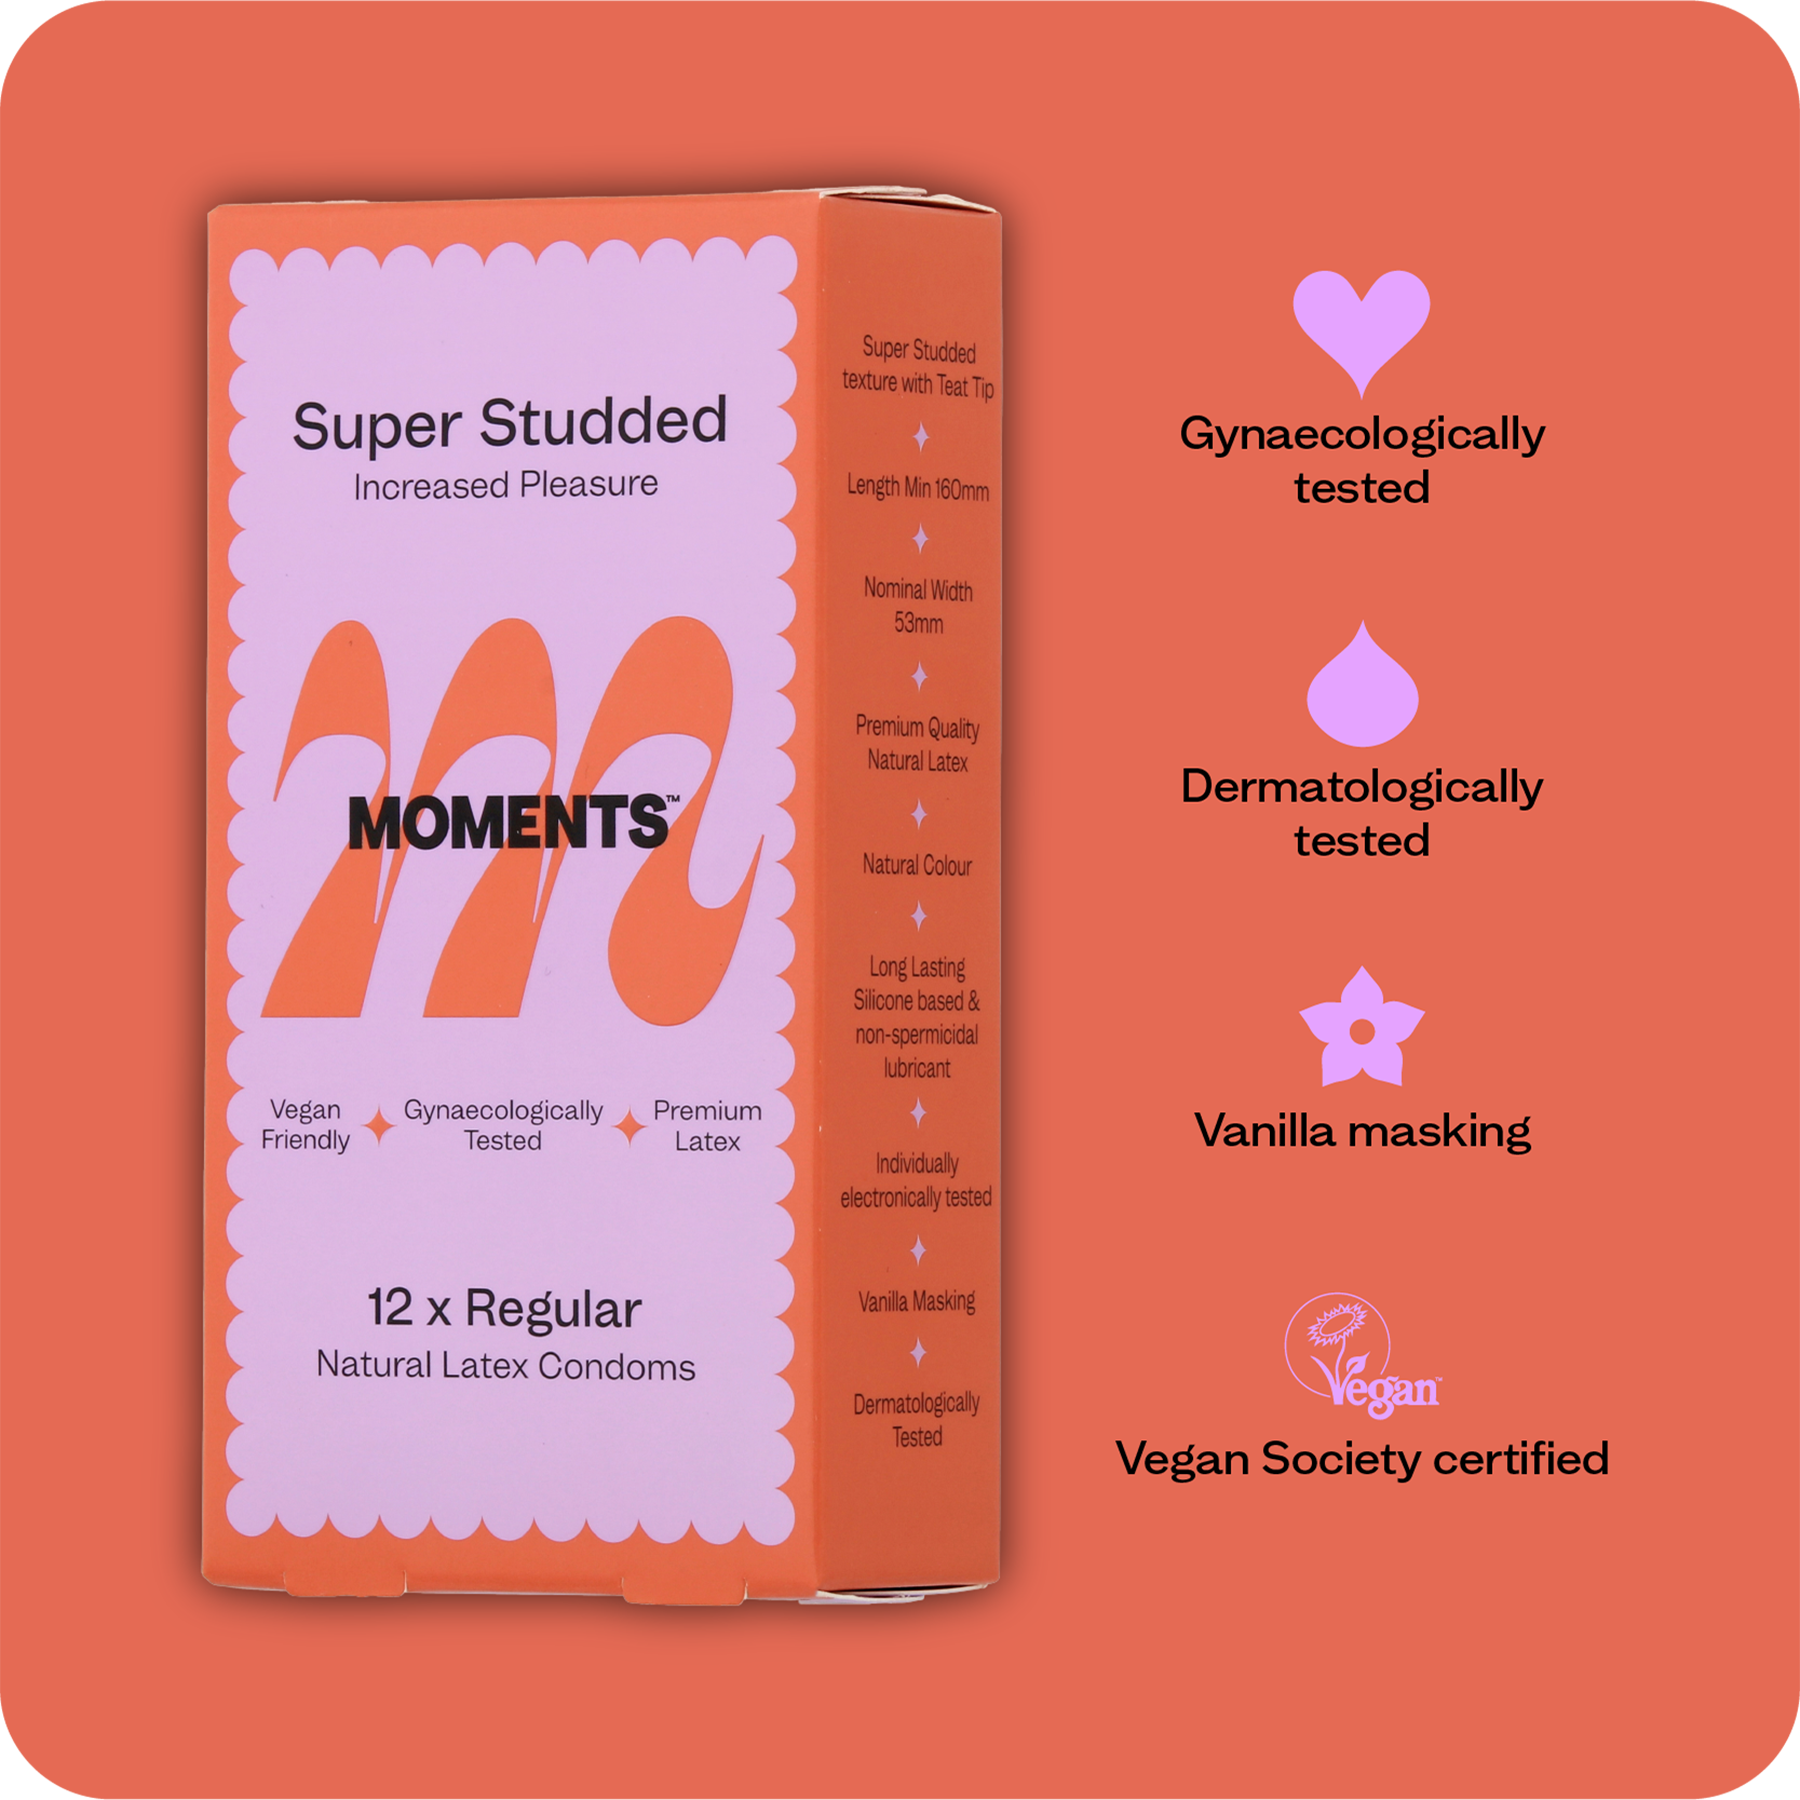 The Moments Super Studded condom box shown from a side angle to emphasize the brand